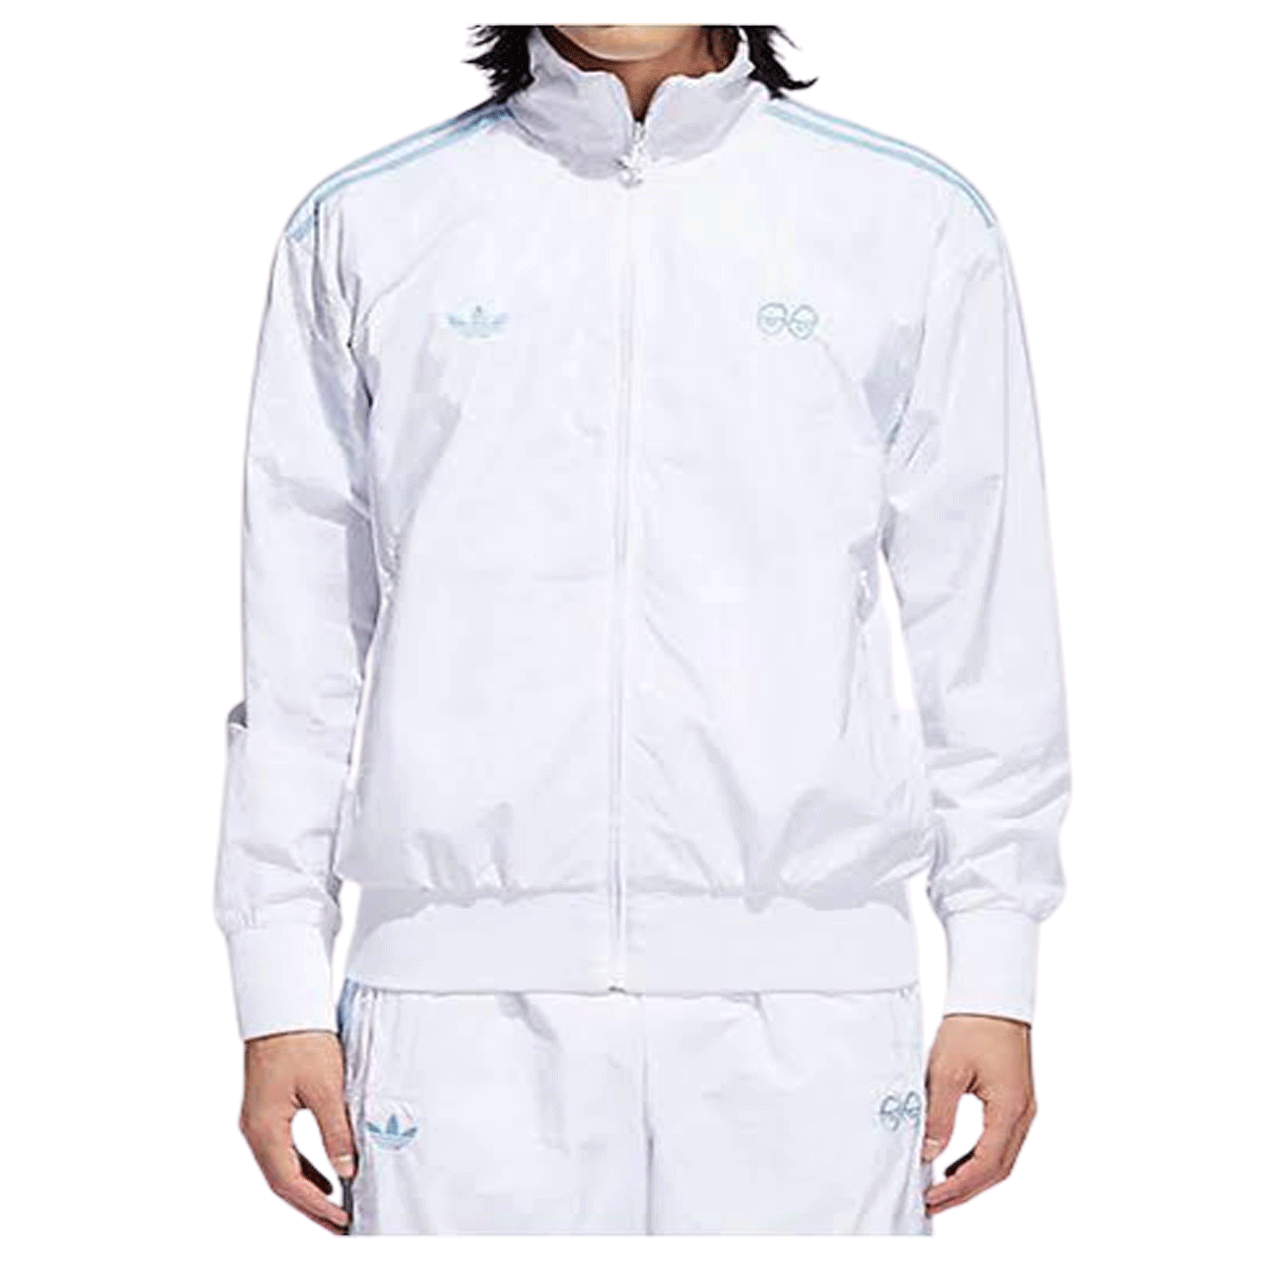 ADIDAS KROOKED TRACK TOP WHITE CW3370